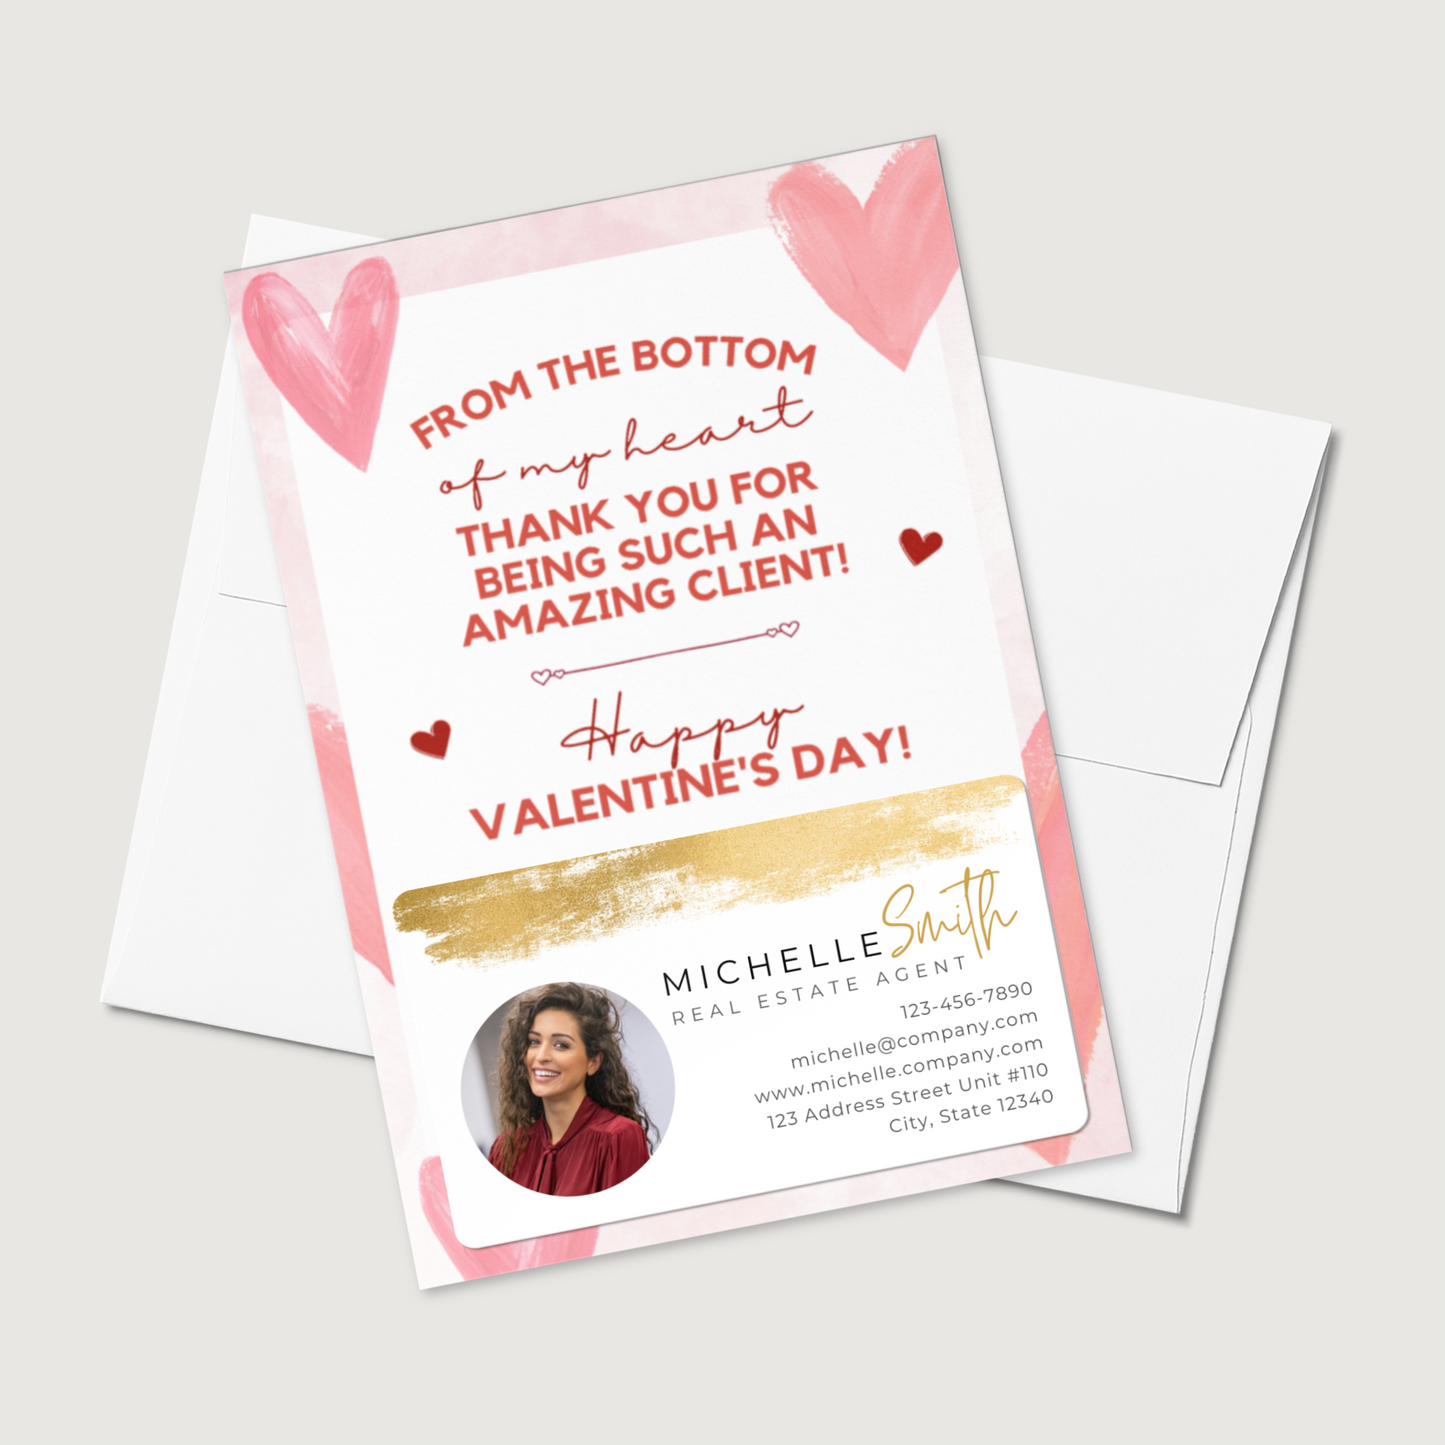 Thank You For Being An Amazing Client - Set of Valentines Postcard Mailers